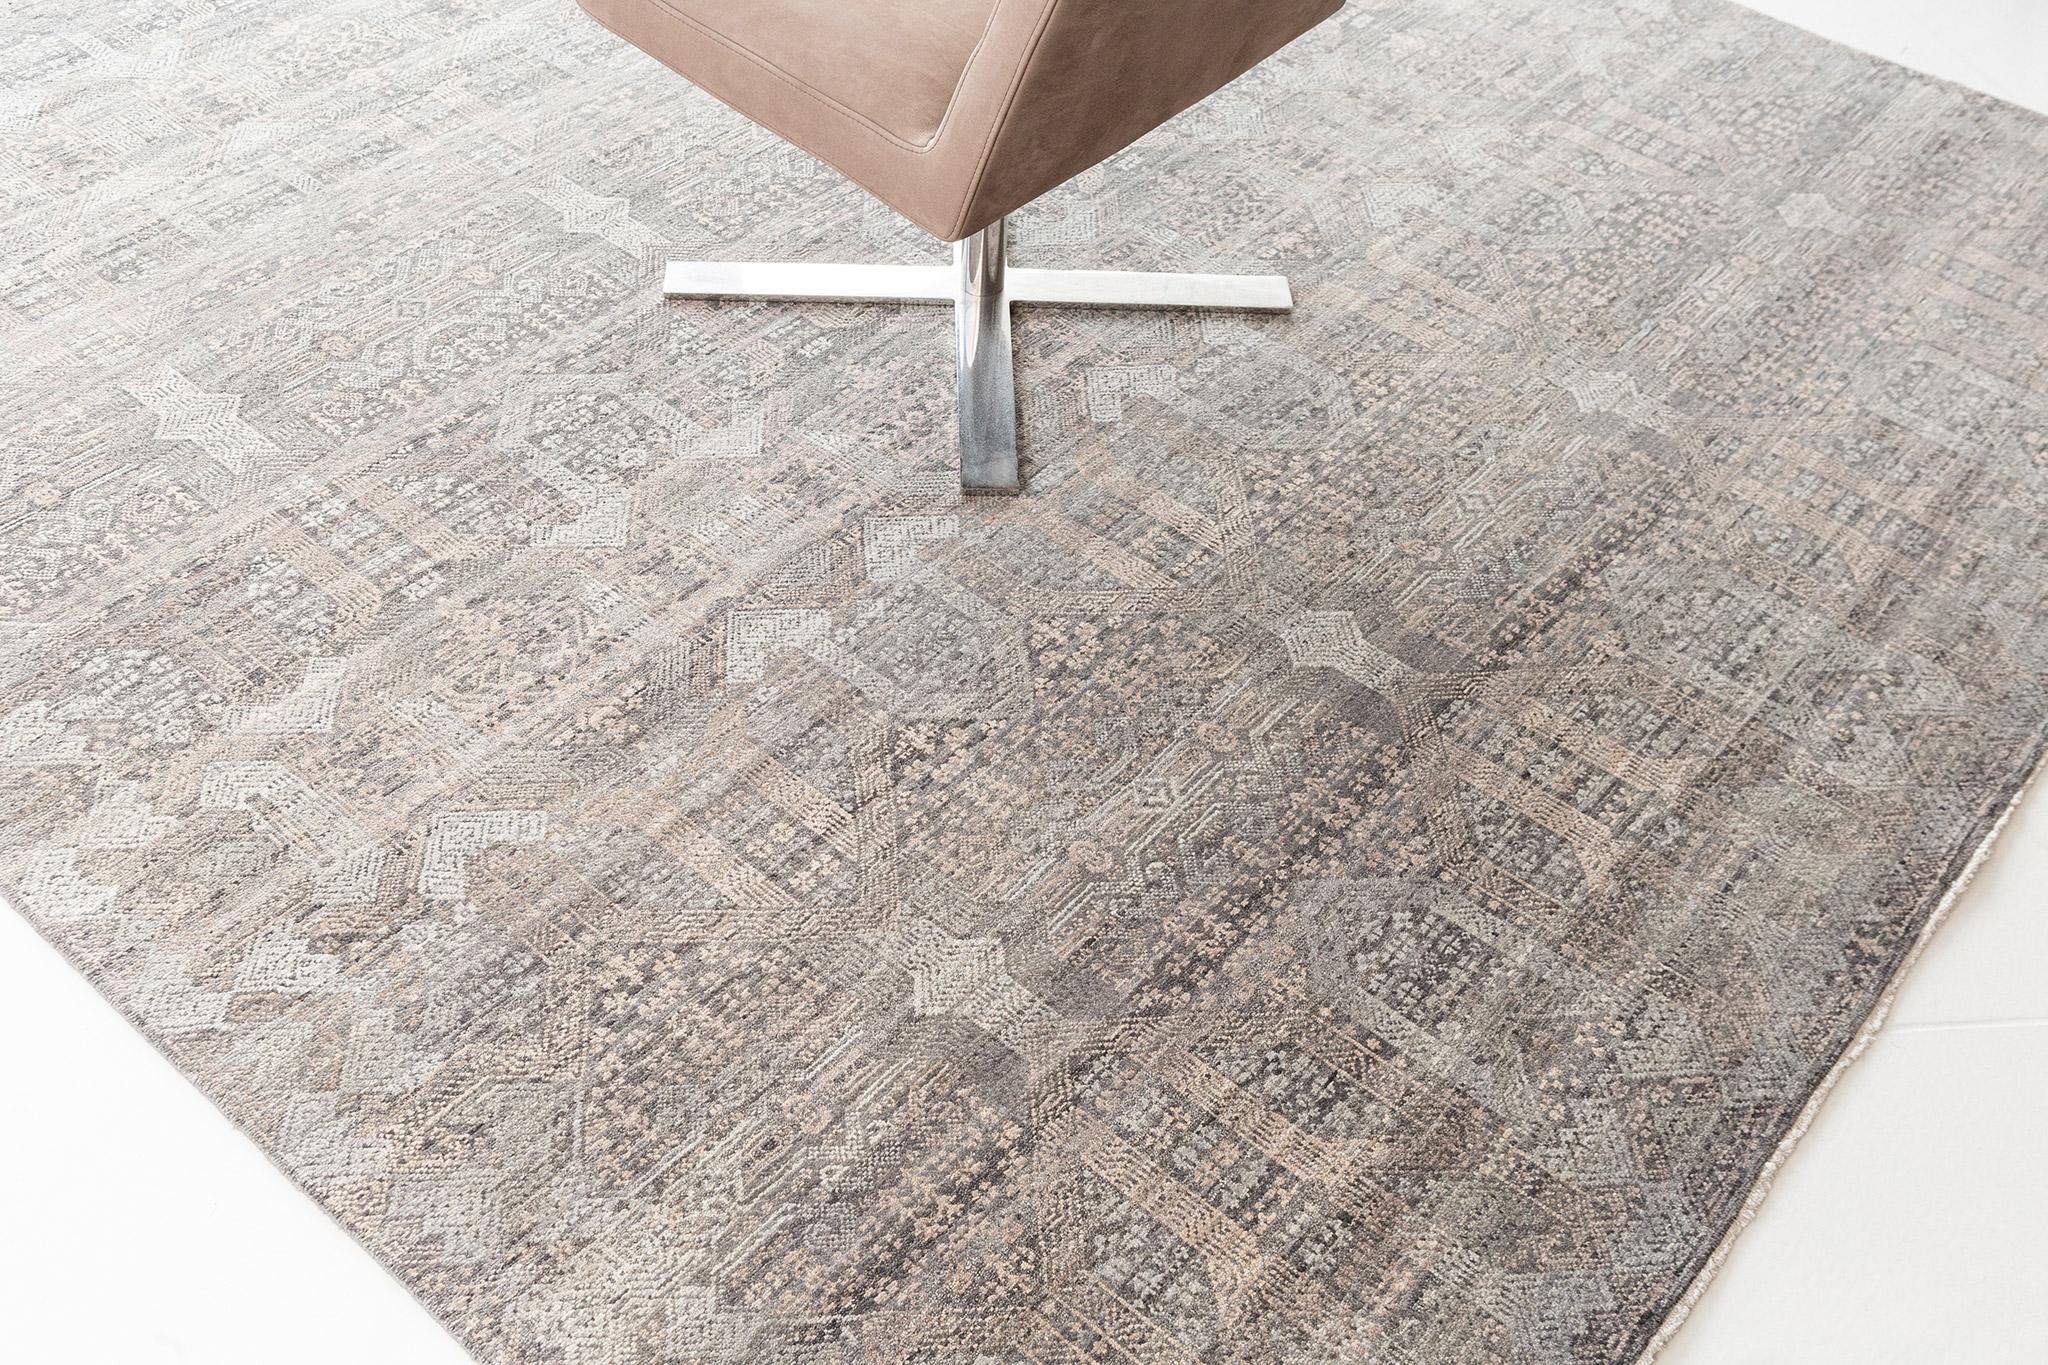 A breathtaking transitional design rug that features the variegated deep tones of gray, camel and ivory. All-over patterns of Indian inspired elements, creates a sophisticated combination for this work of art. Simply put, this captivating creation